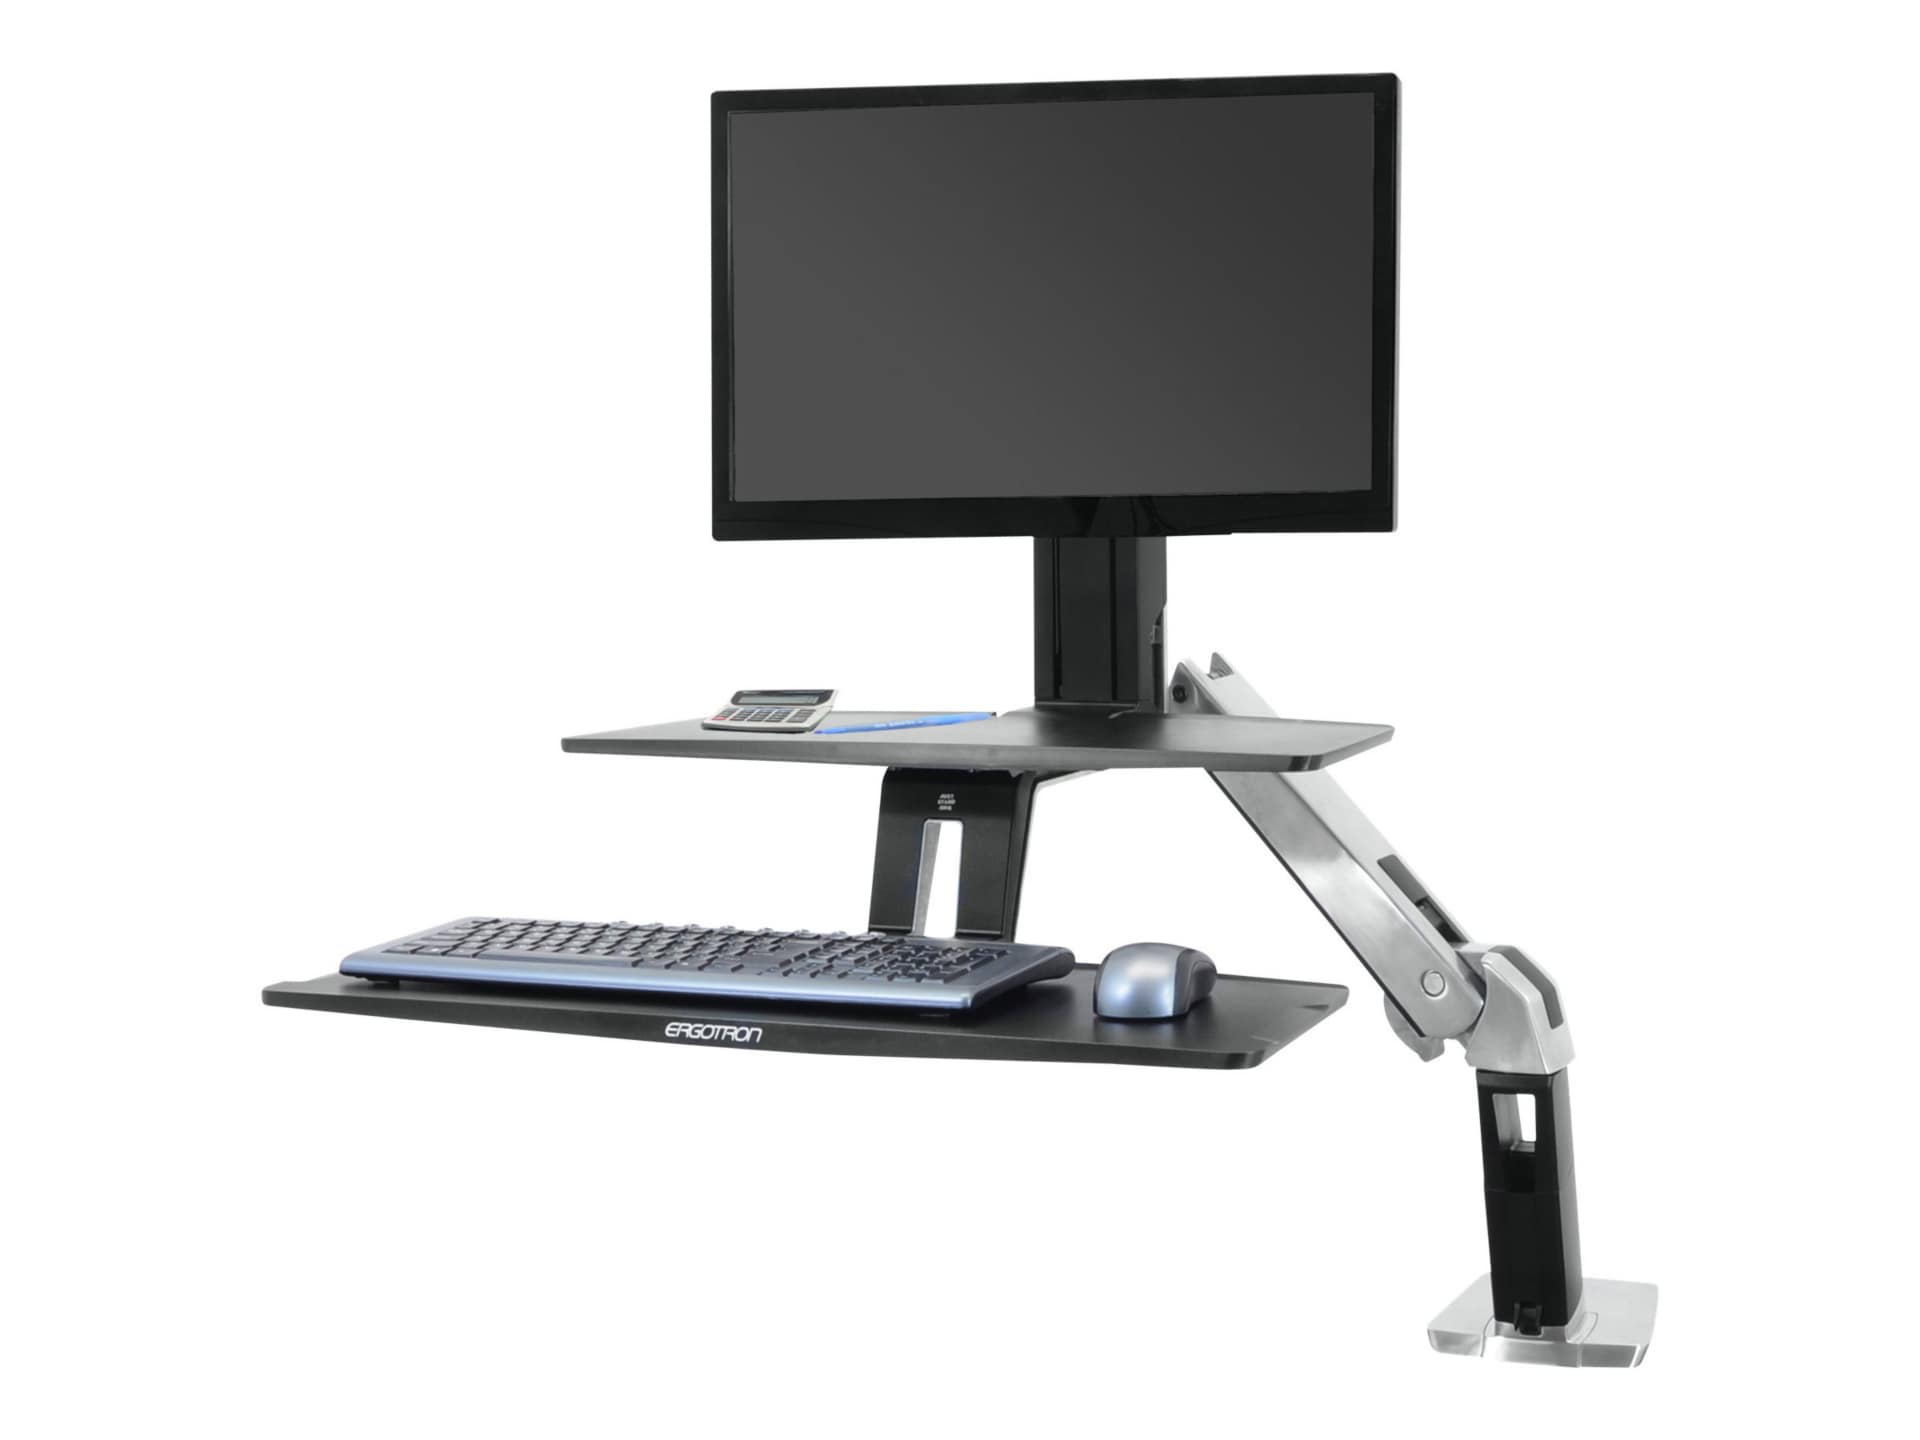 Ergotron WorkFit-A Single HD Workstation With Suspended Keyboard - standing